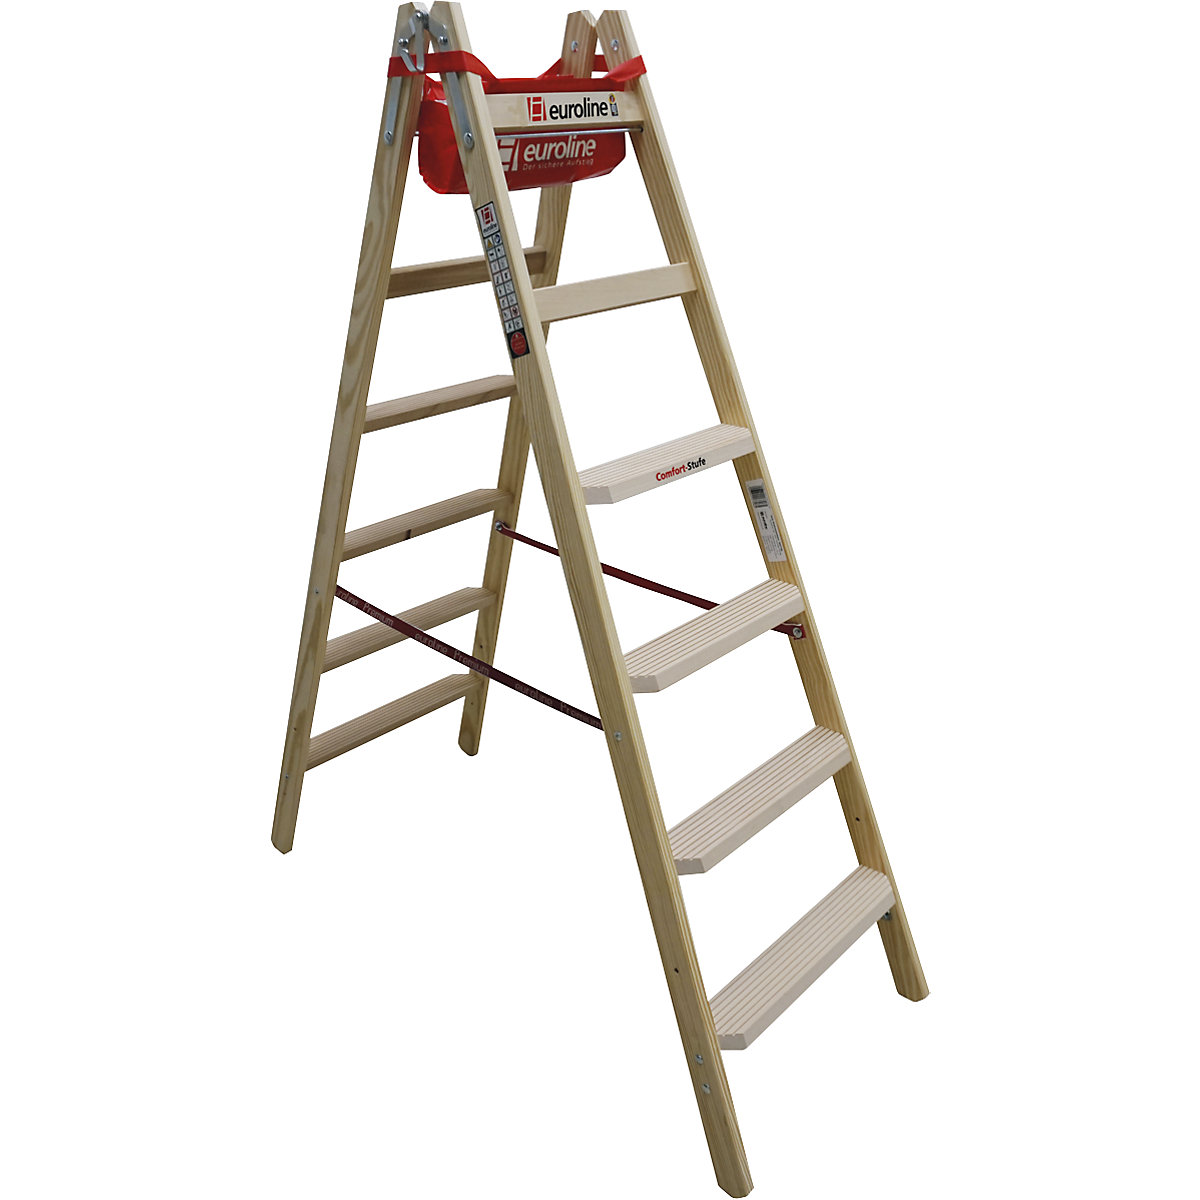 Wooden step ladder with comfort steps – euroline, double sided access, 2 x 6 steps-4